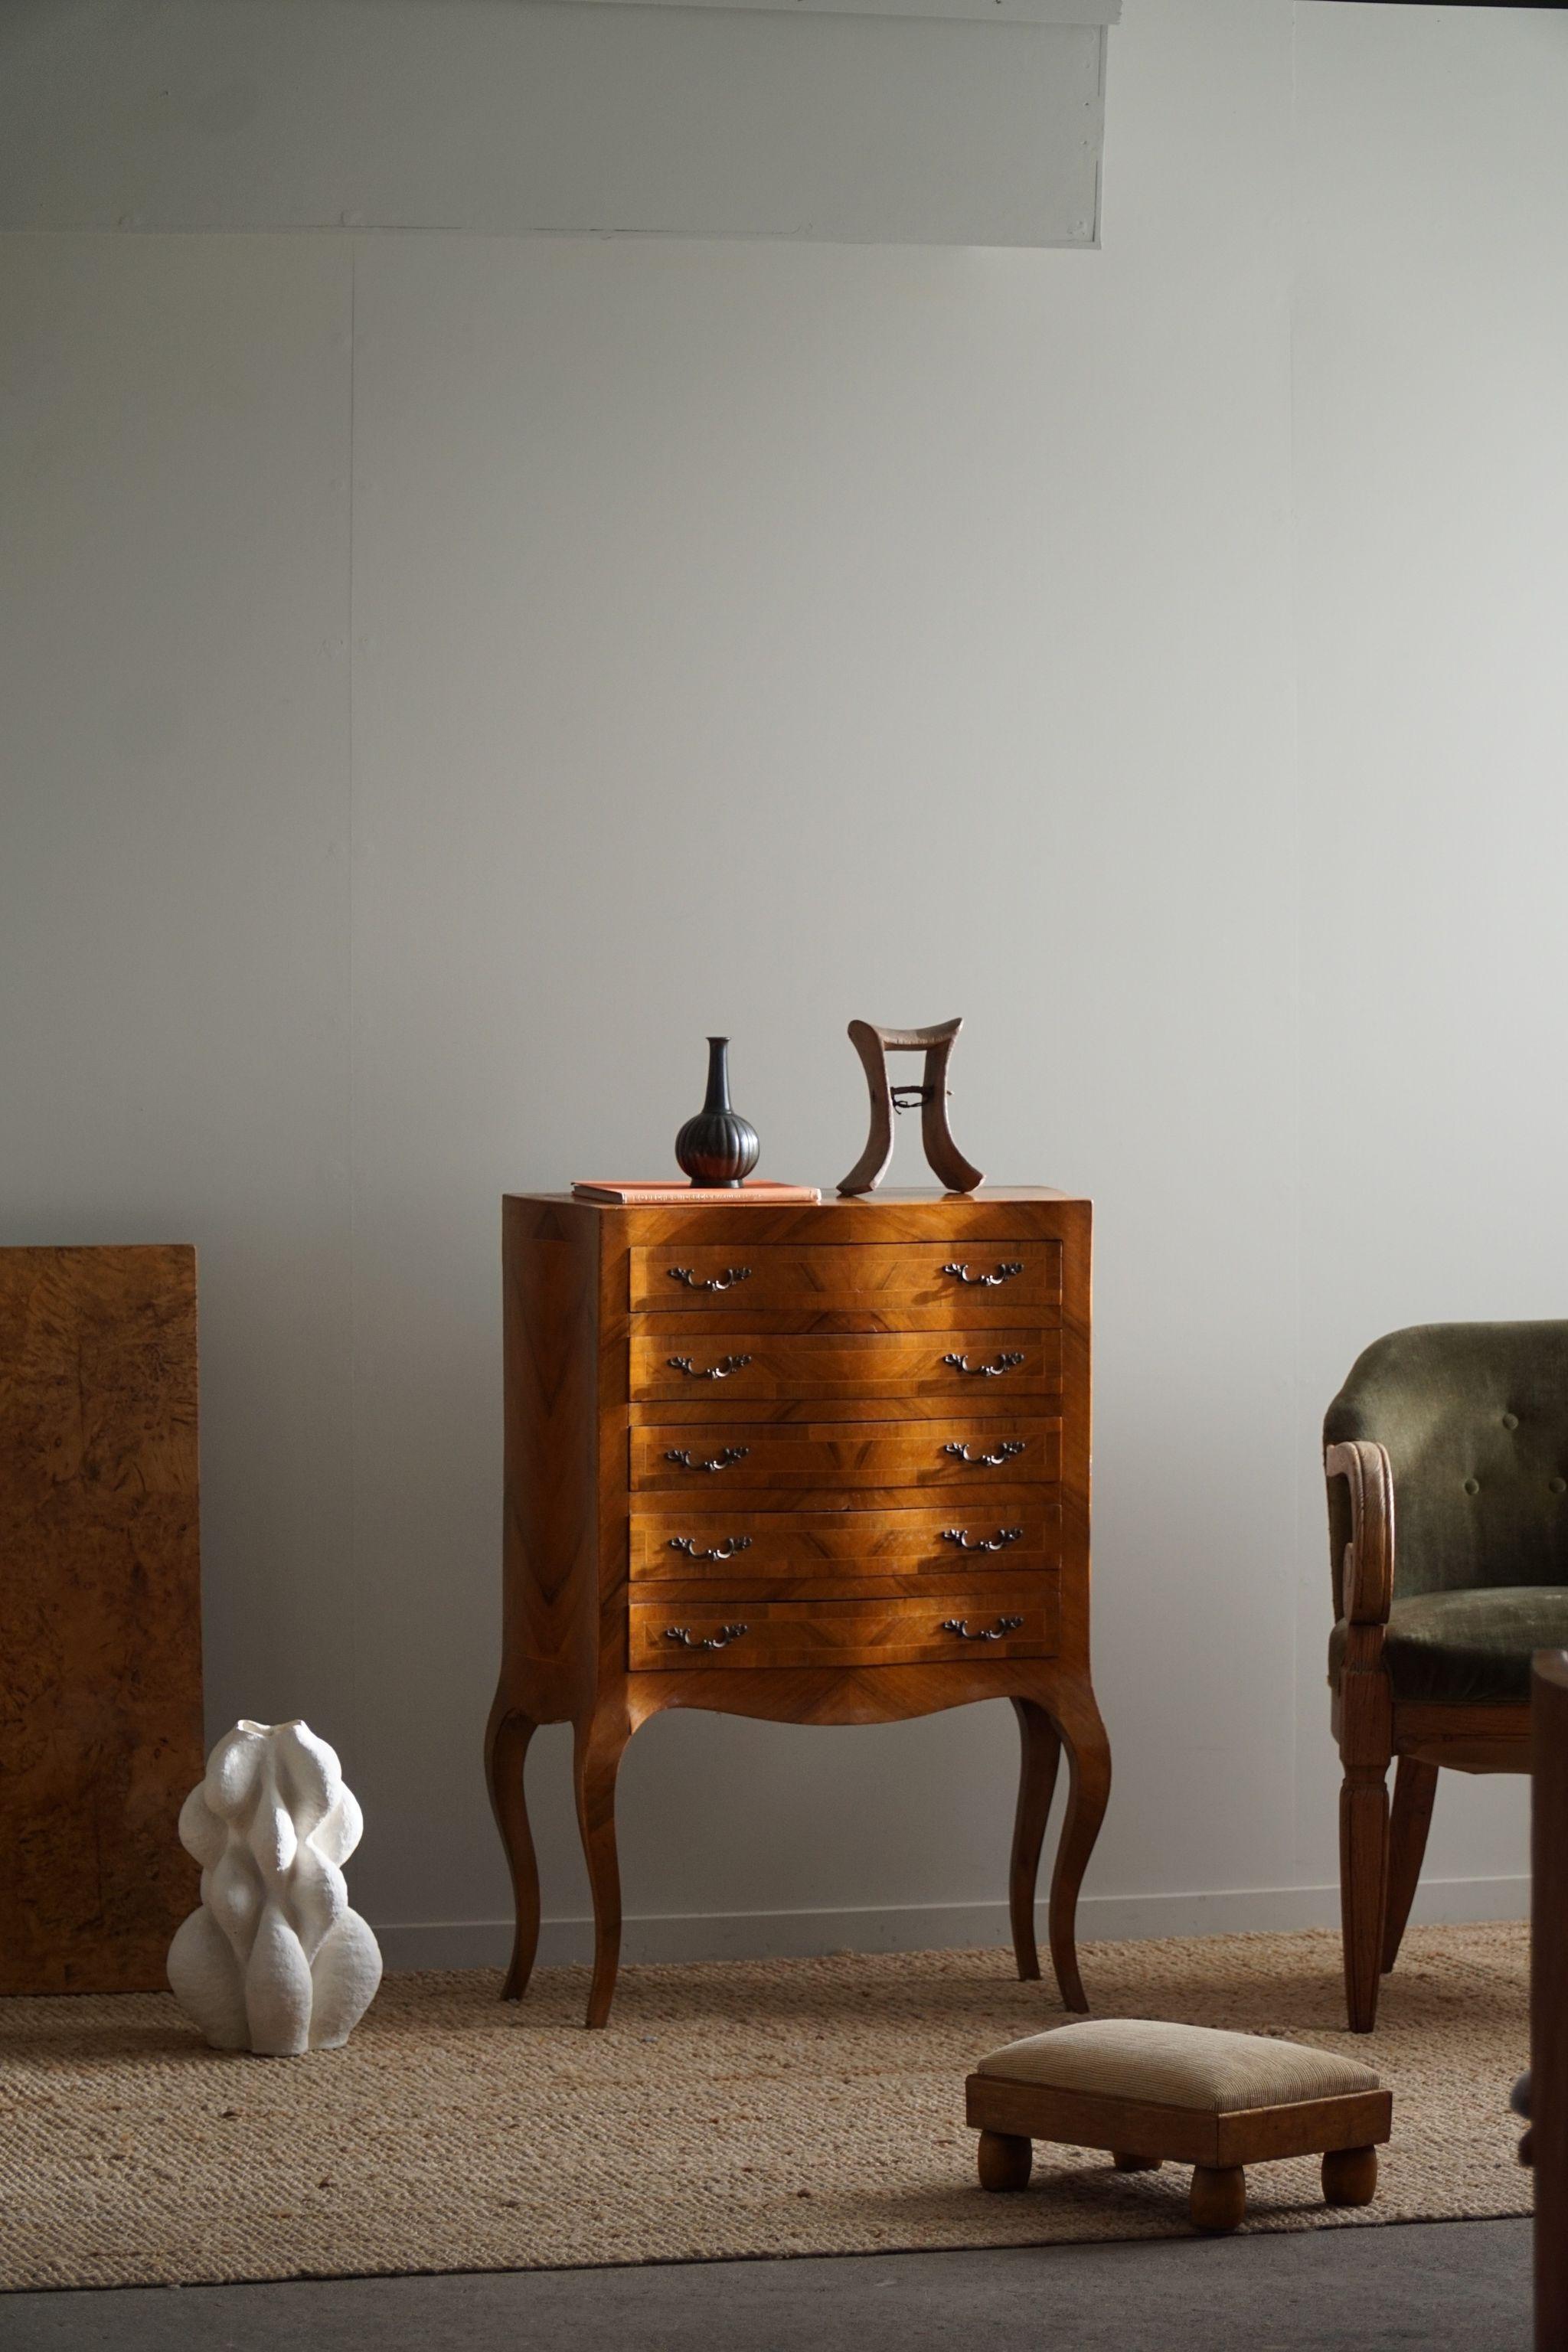 This small luxurious and elegant Antique Danish chiffonier with cabriole legs is a true testament to the exquisite craftsmanship of the late 19th century. Crafted from the rare and prized lemon tree wood, this piece exudes a unique charm that is